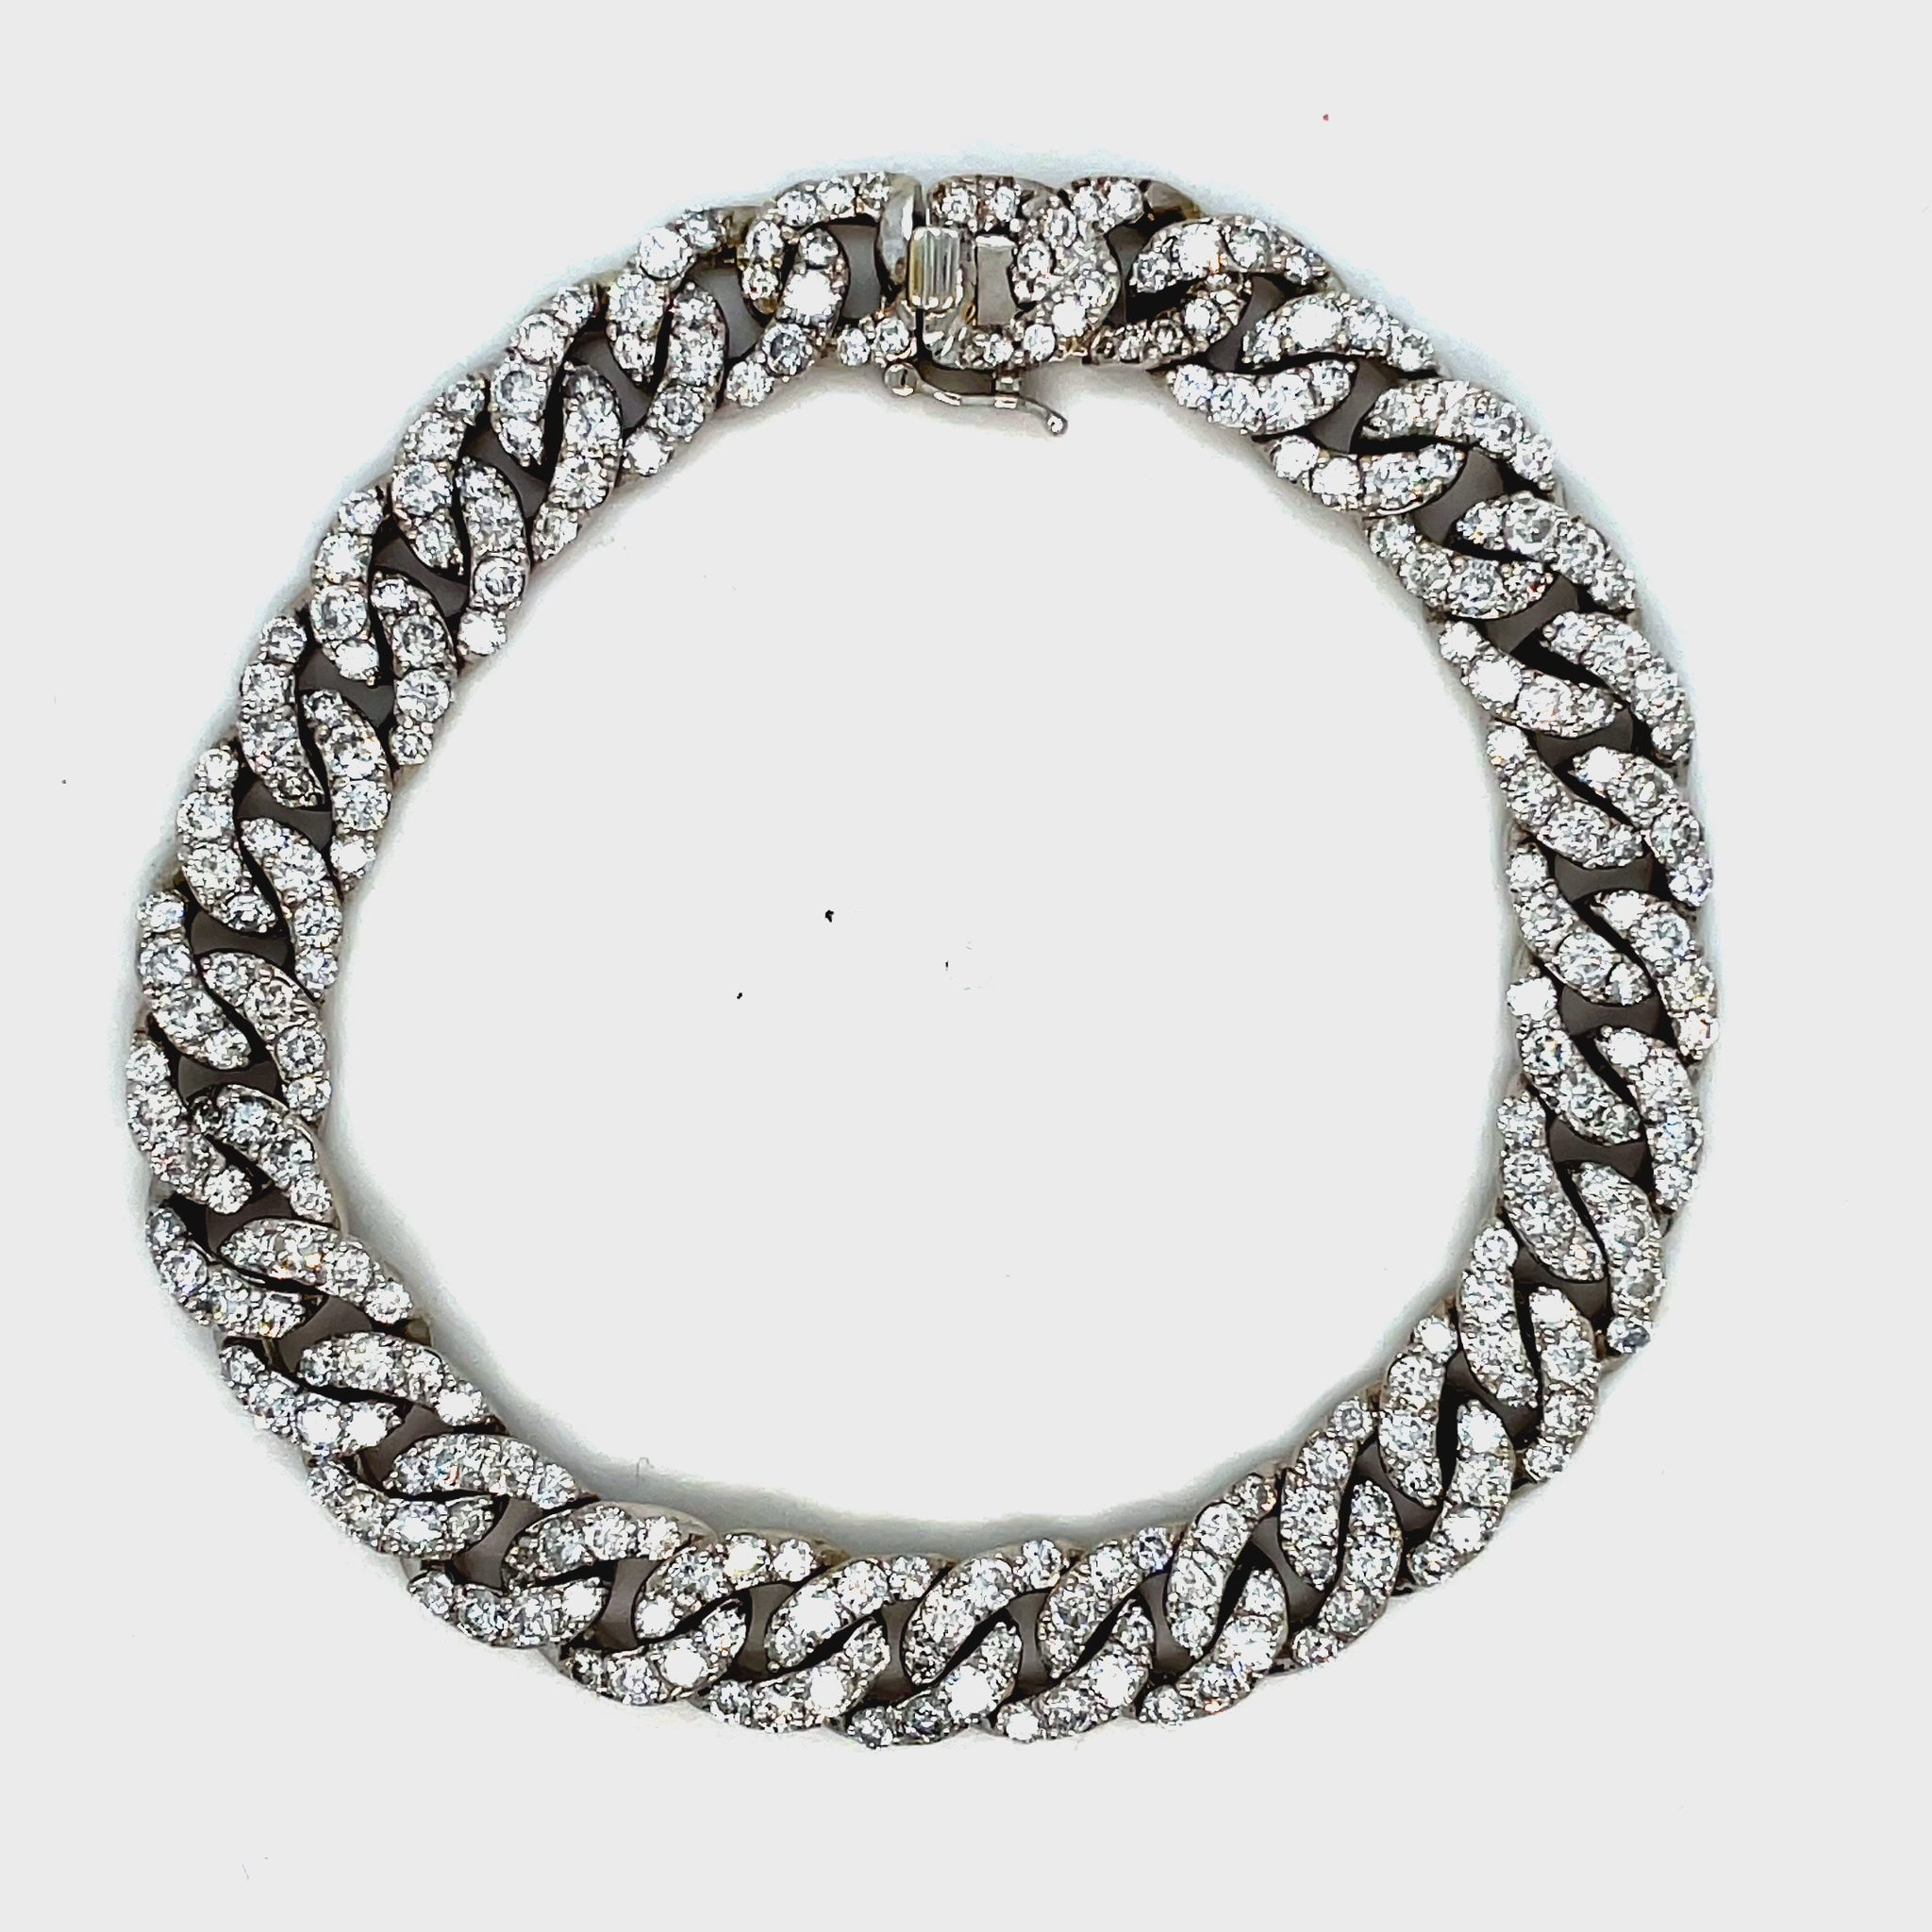 This 18k white gold chain link diamond bracelet features 7.58 carats of round diamonds for sparkle and shine. The bracelet is 7 1/4" long and features a hidden clasp for security and a classic curb link design.